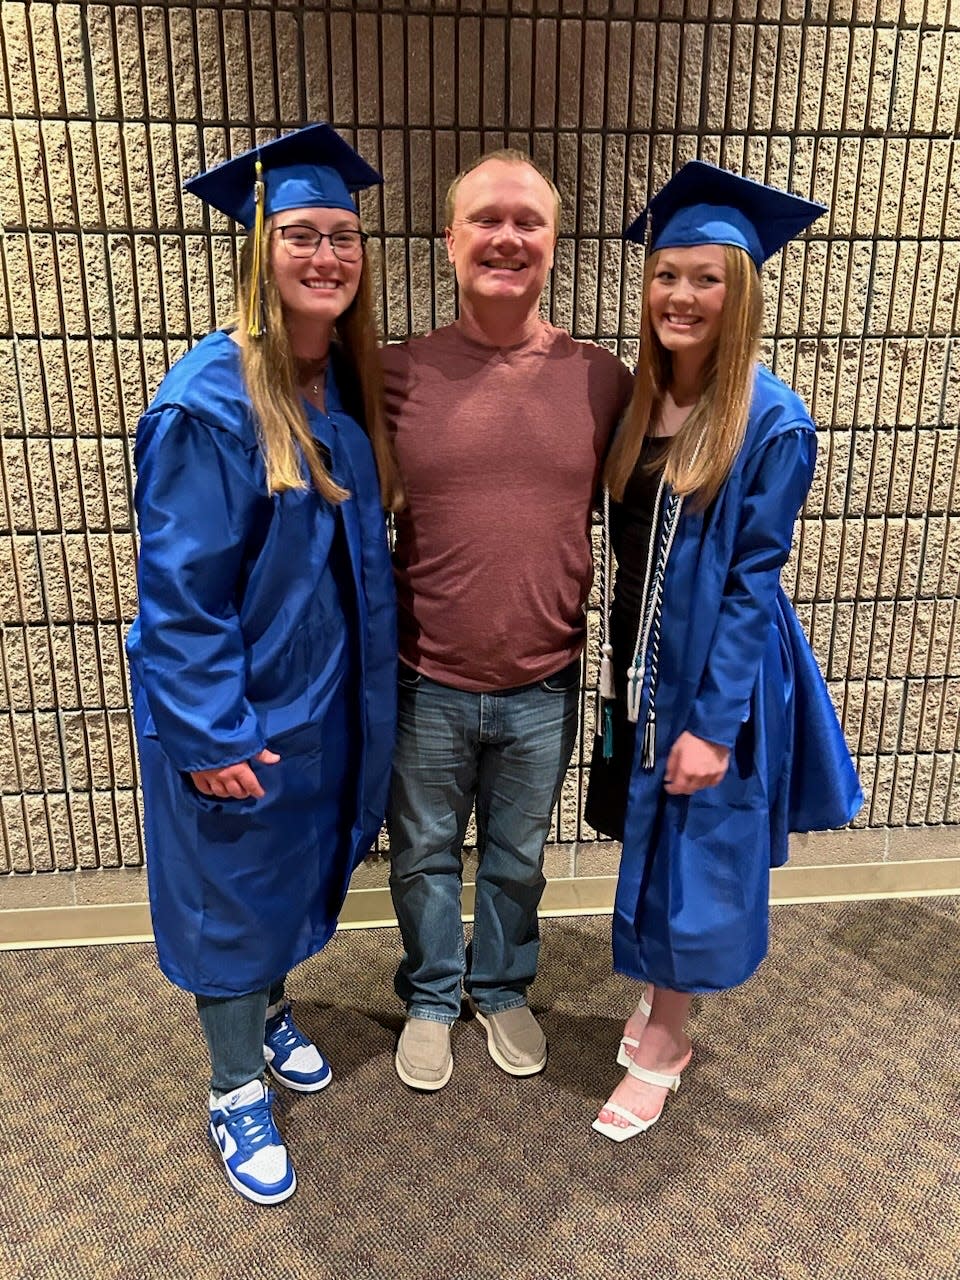 Jim Gastineau, middle, will witness twin daughters Olivia and Lexie Gastineau graduate on Sunday at Ava High School. He missed their birth because his military unit was stationed in Iraq in 2005.